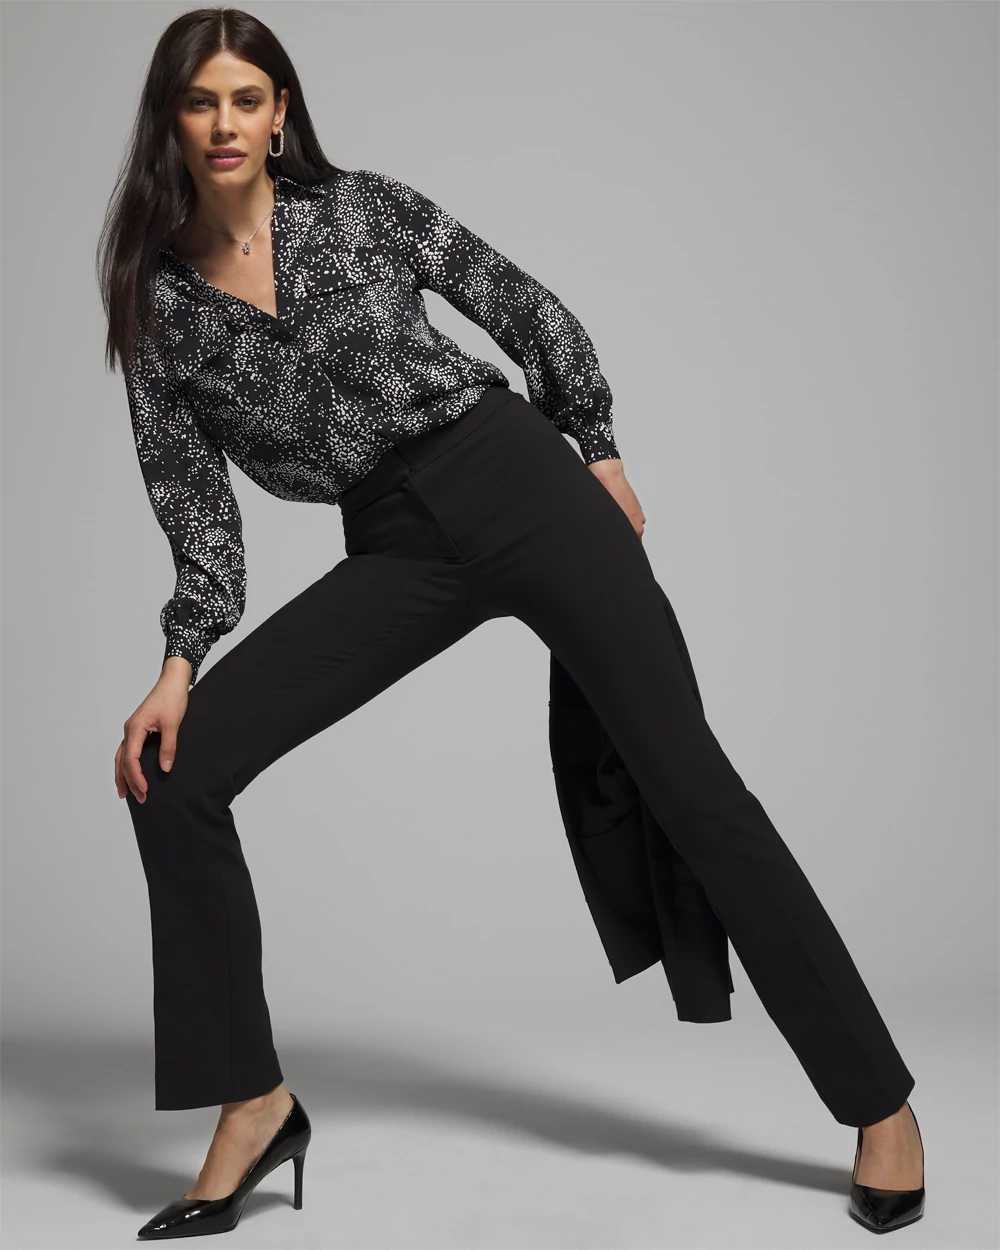 Outlet WHBM The Slim Boot Pant click to view larger image.